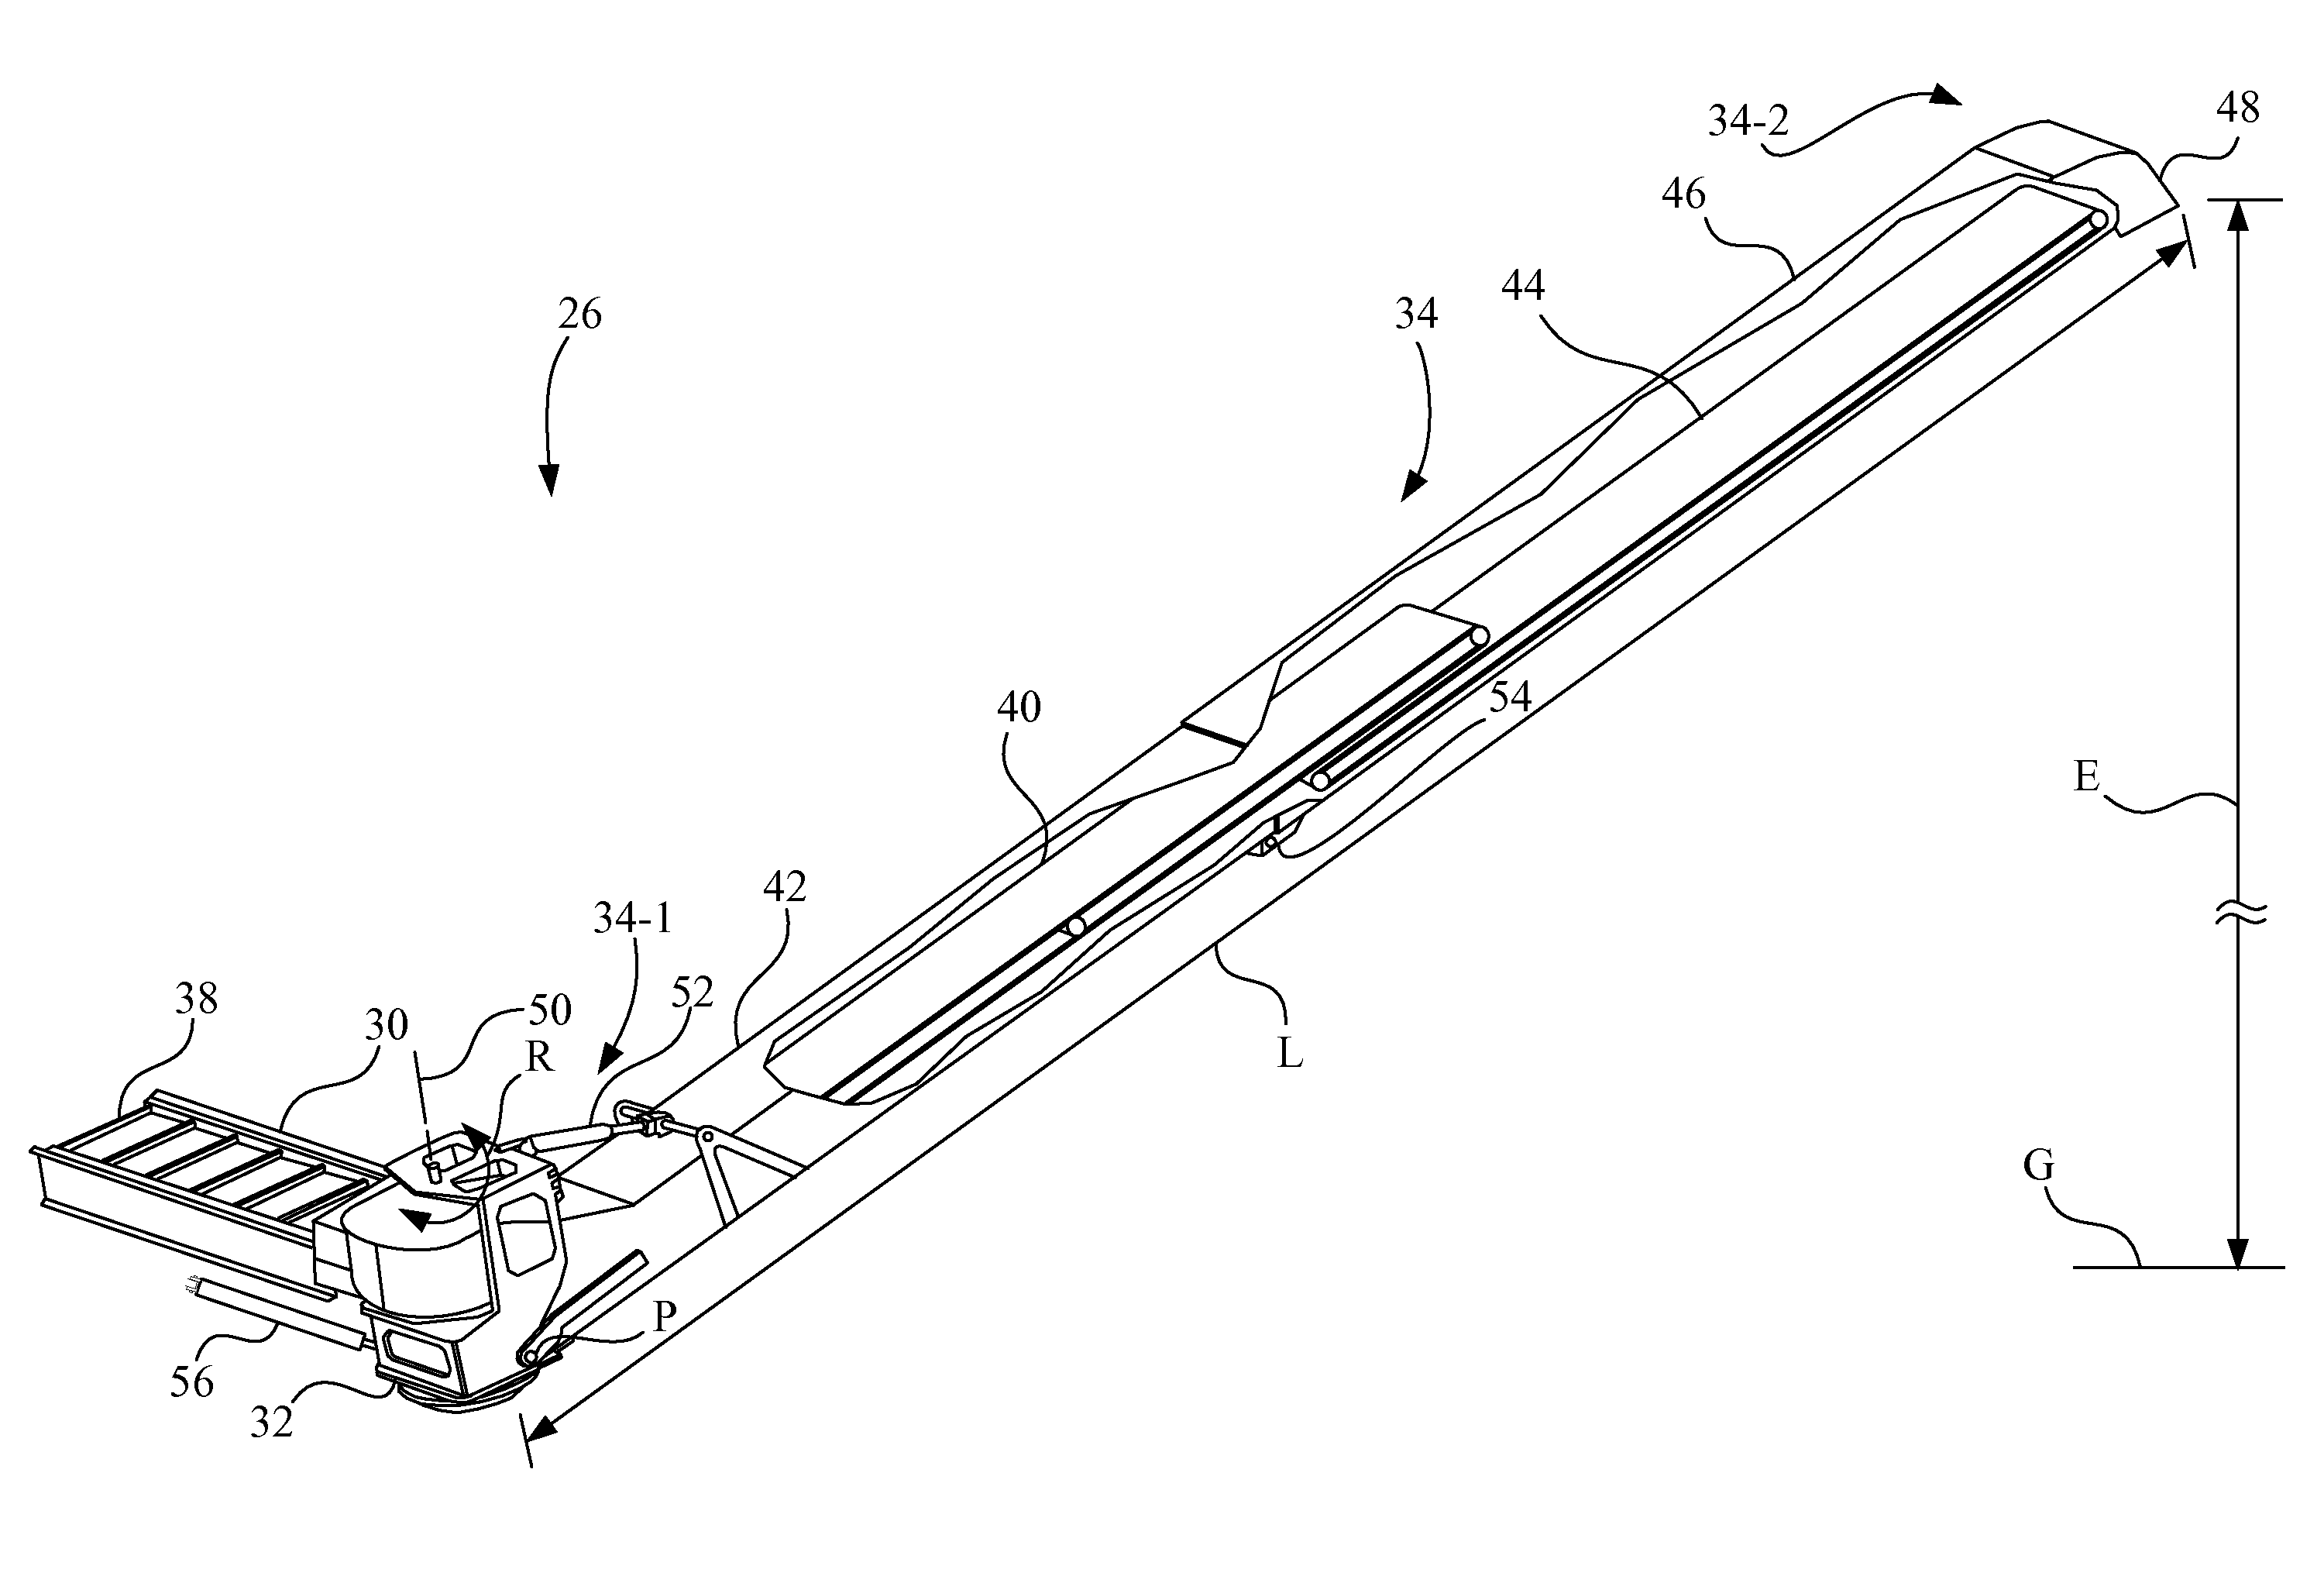 Agricultural work machine having an unloading system for unloading an agricultural product